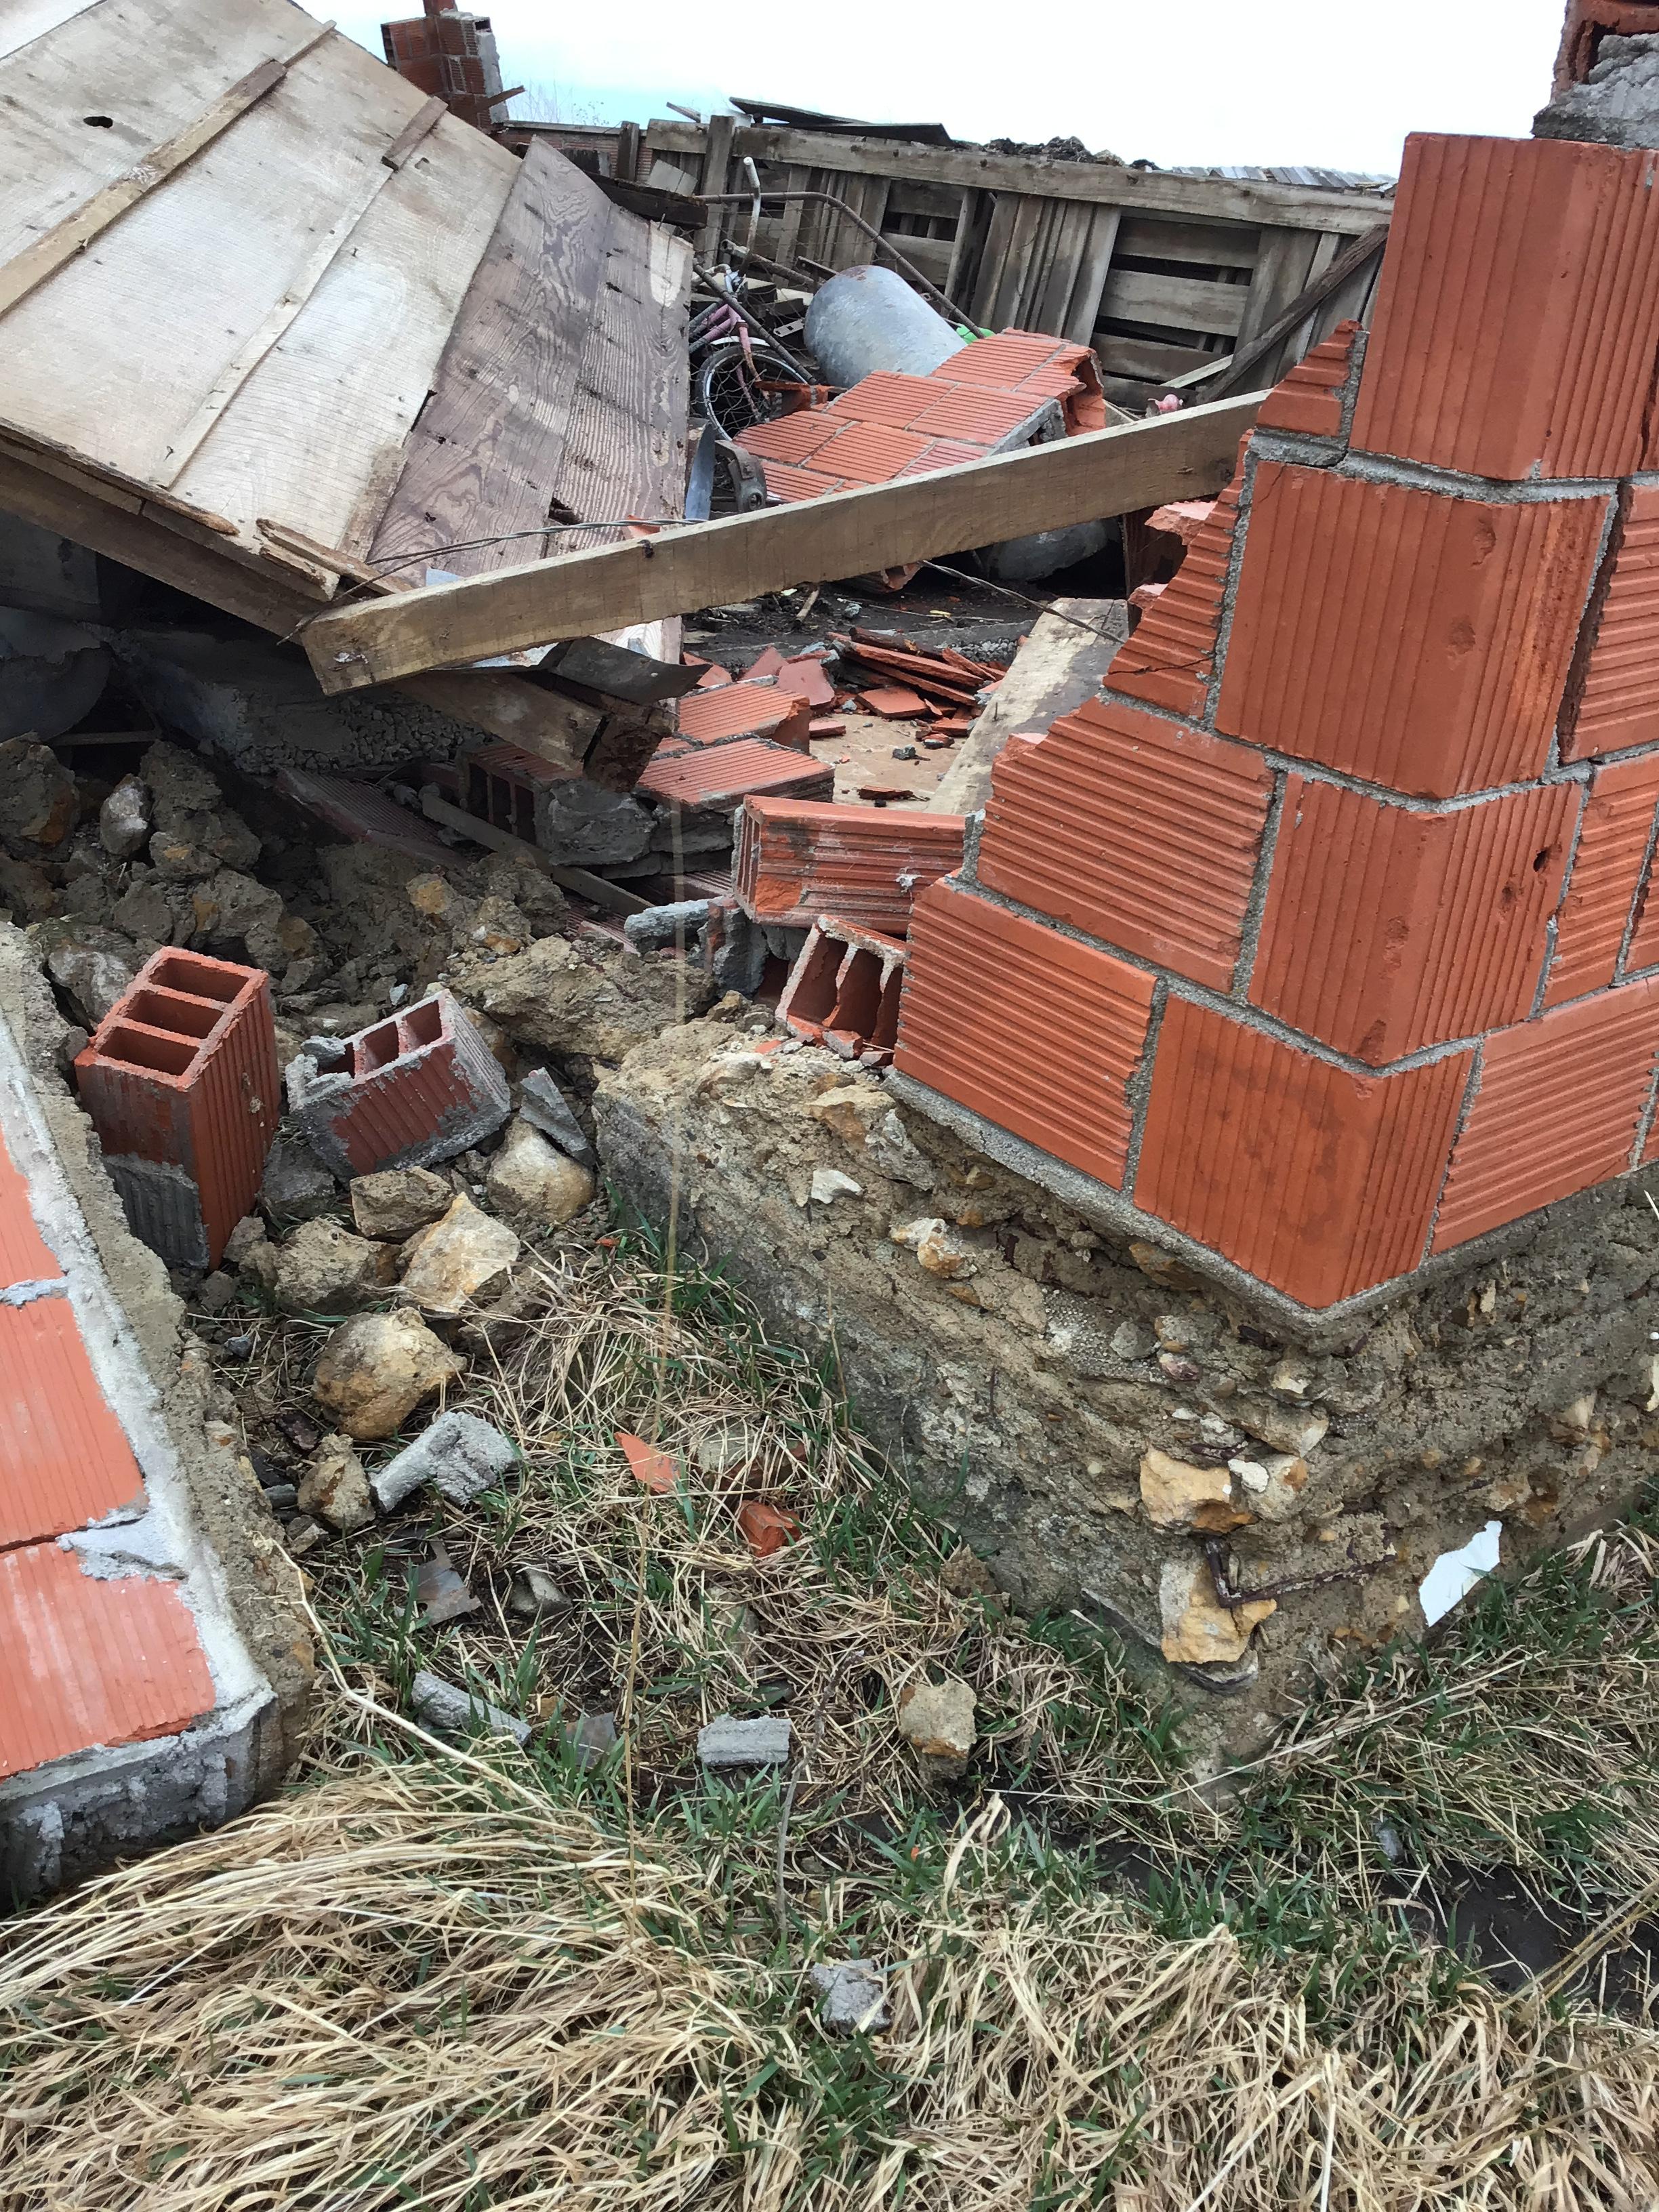 Wall of a brick building collapsed